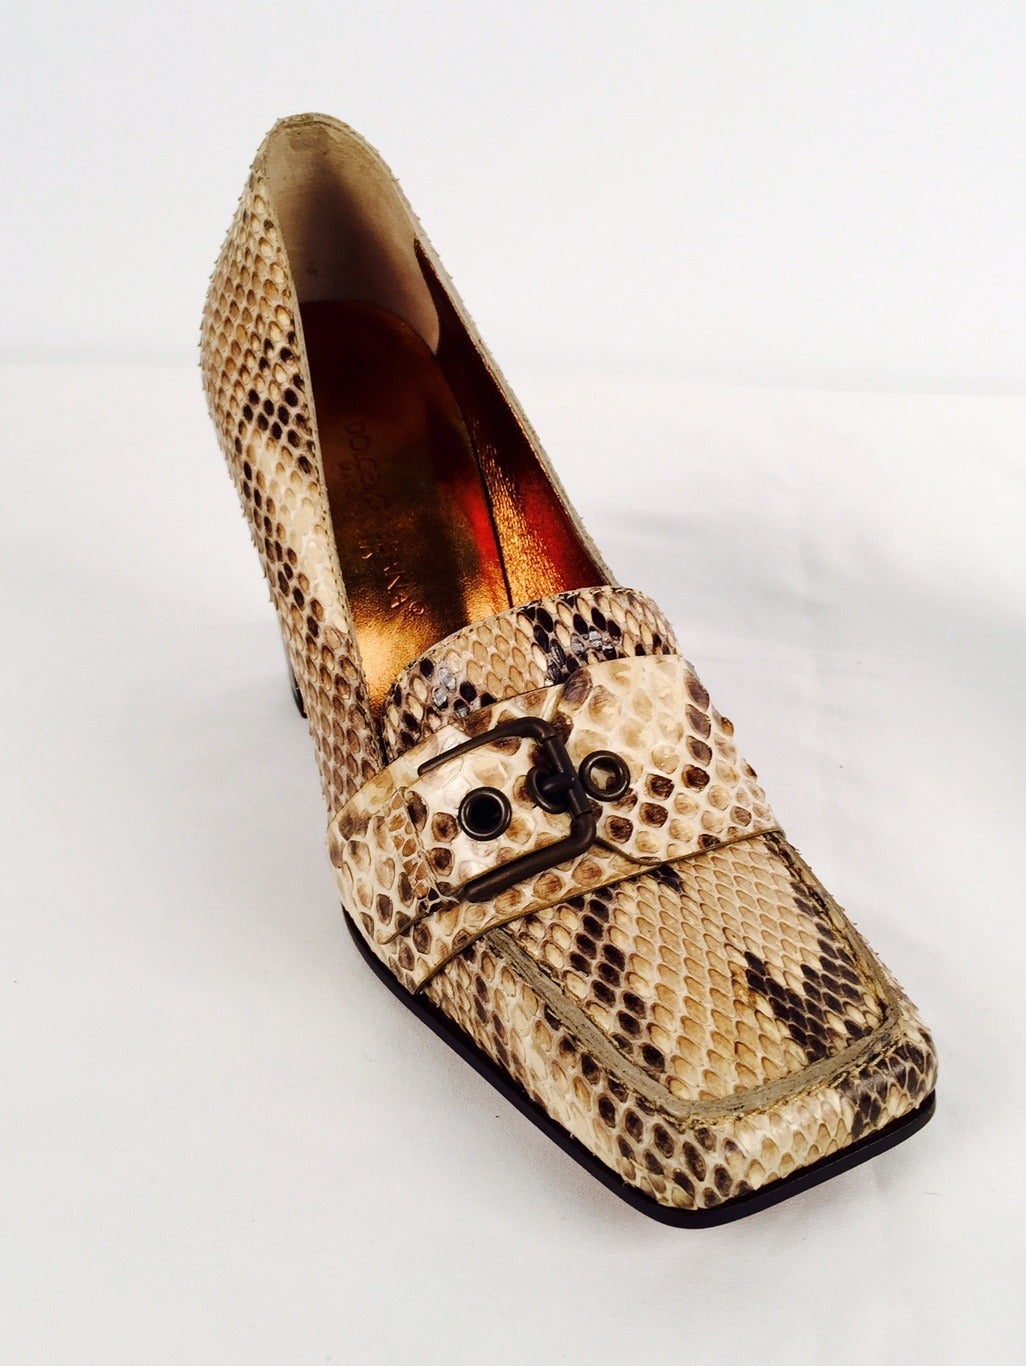 Dolce & Gabbana Snakeskin Square-Toe Pumps are sophisticated and timeless.  Features luxurious gold snakeskin and bronze metallic leather insole.  Leather soles.  Buckled strap across the vamp is the finishing touch!  3.5